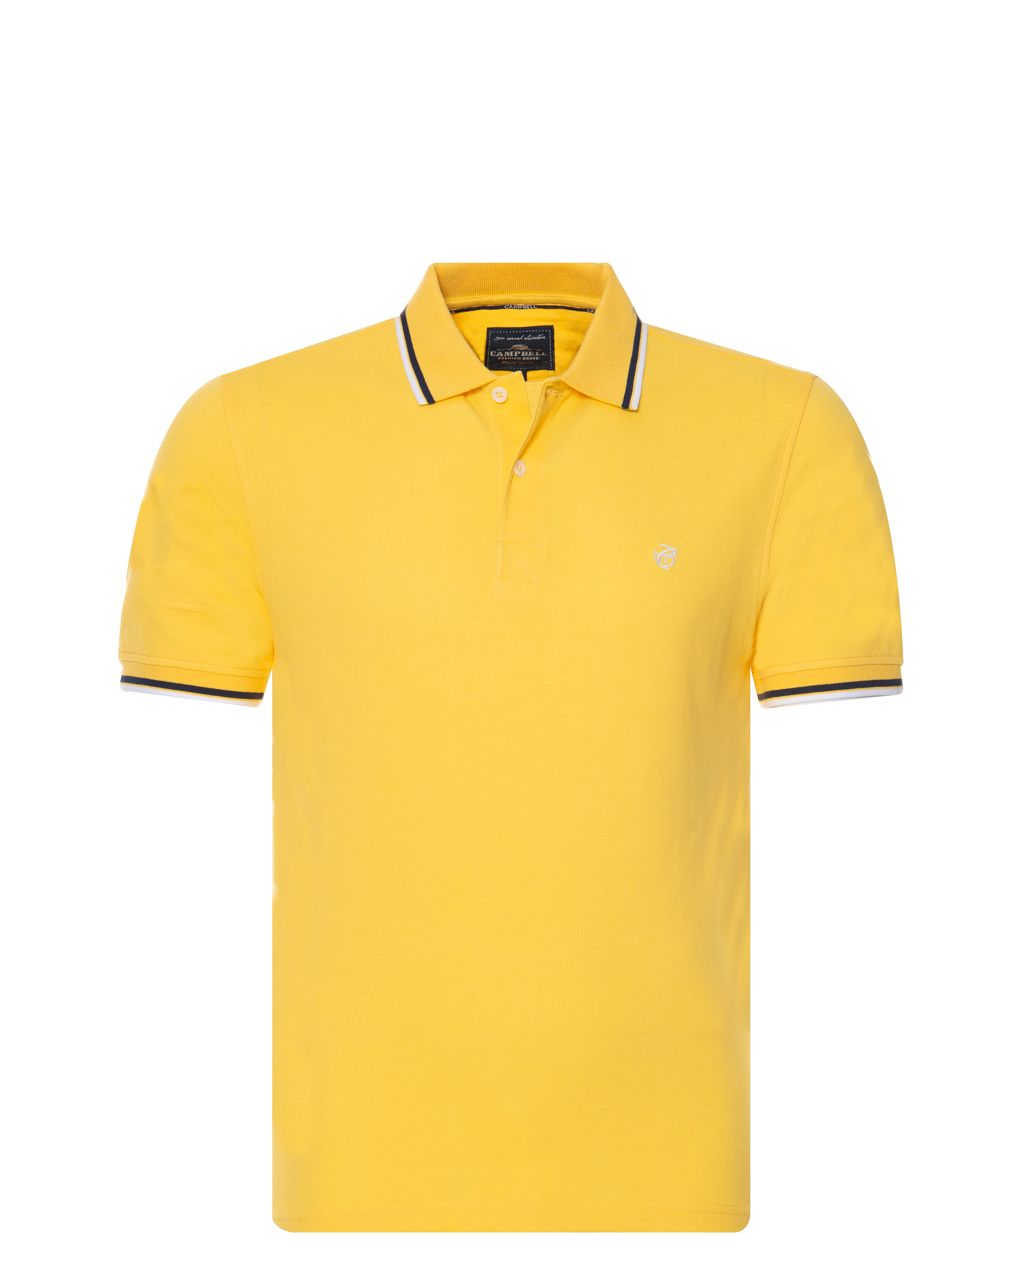 Campbell Classic Leicester Polo KM Lichtgeel uni 074096-002-L